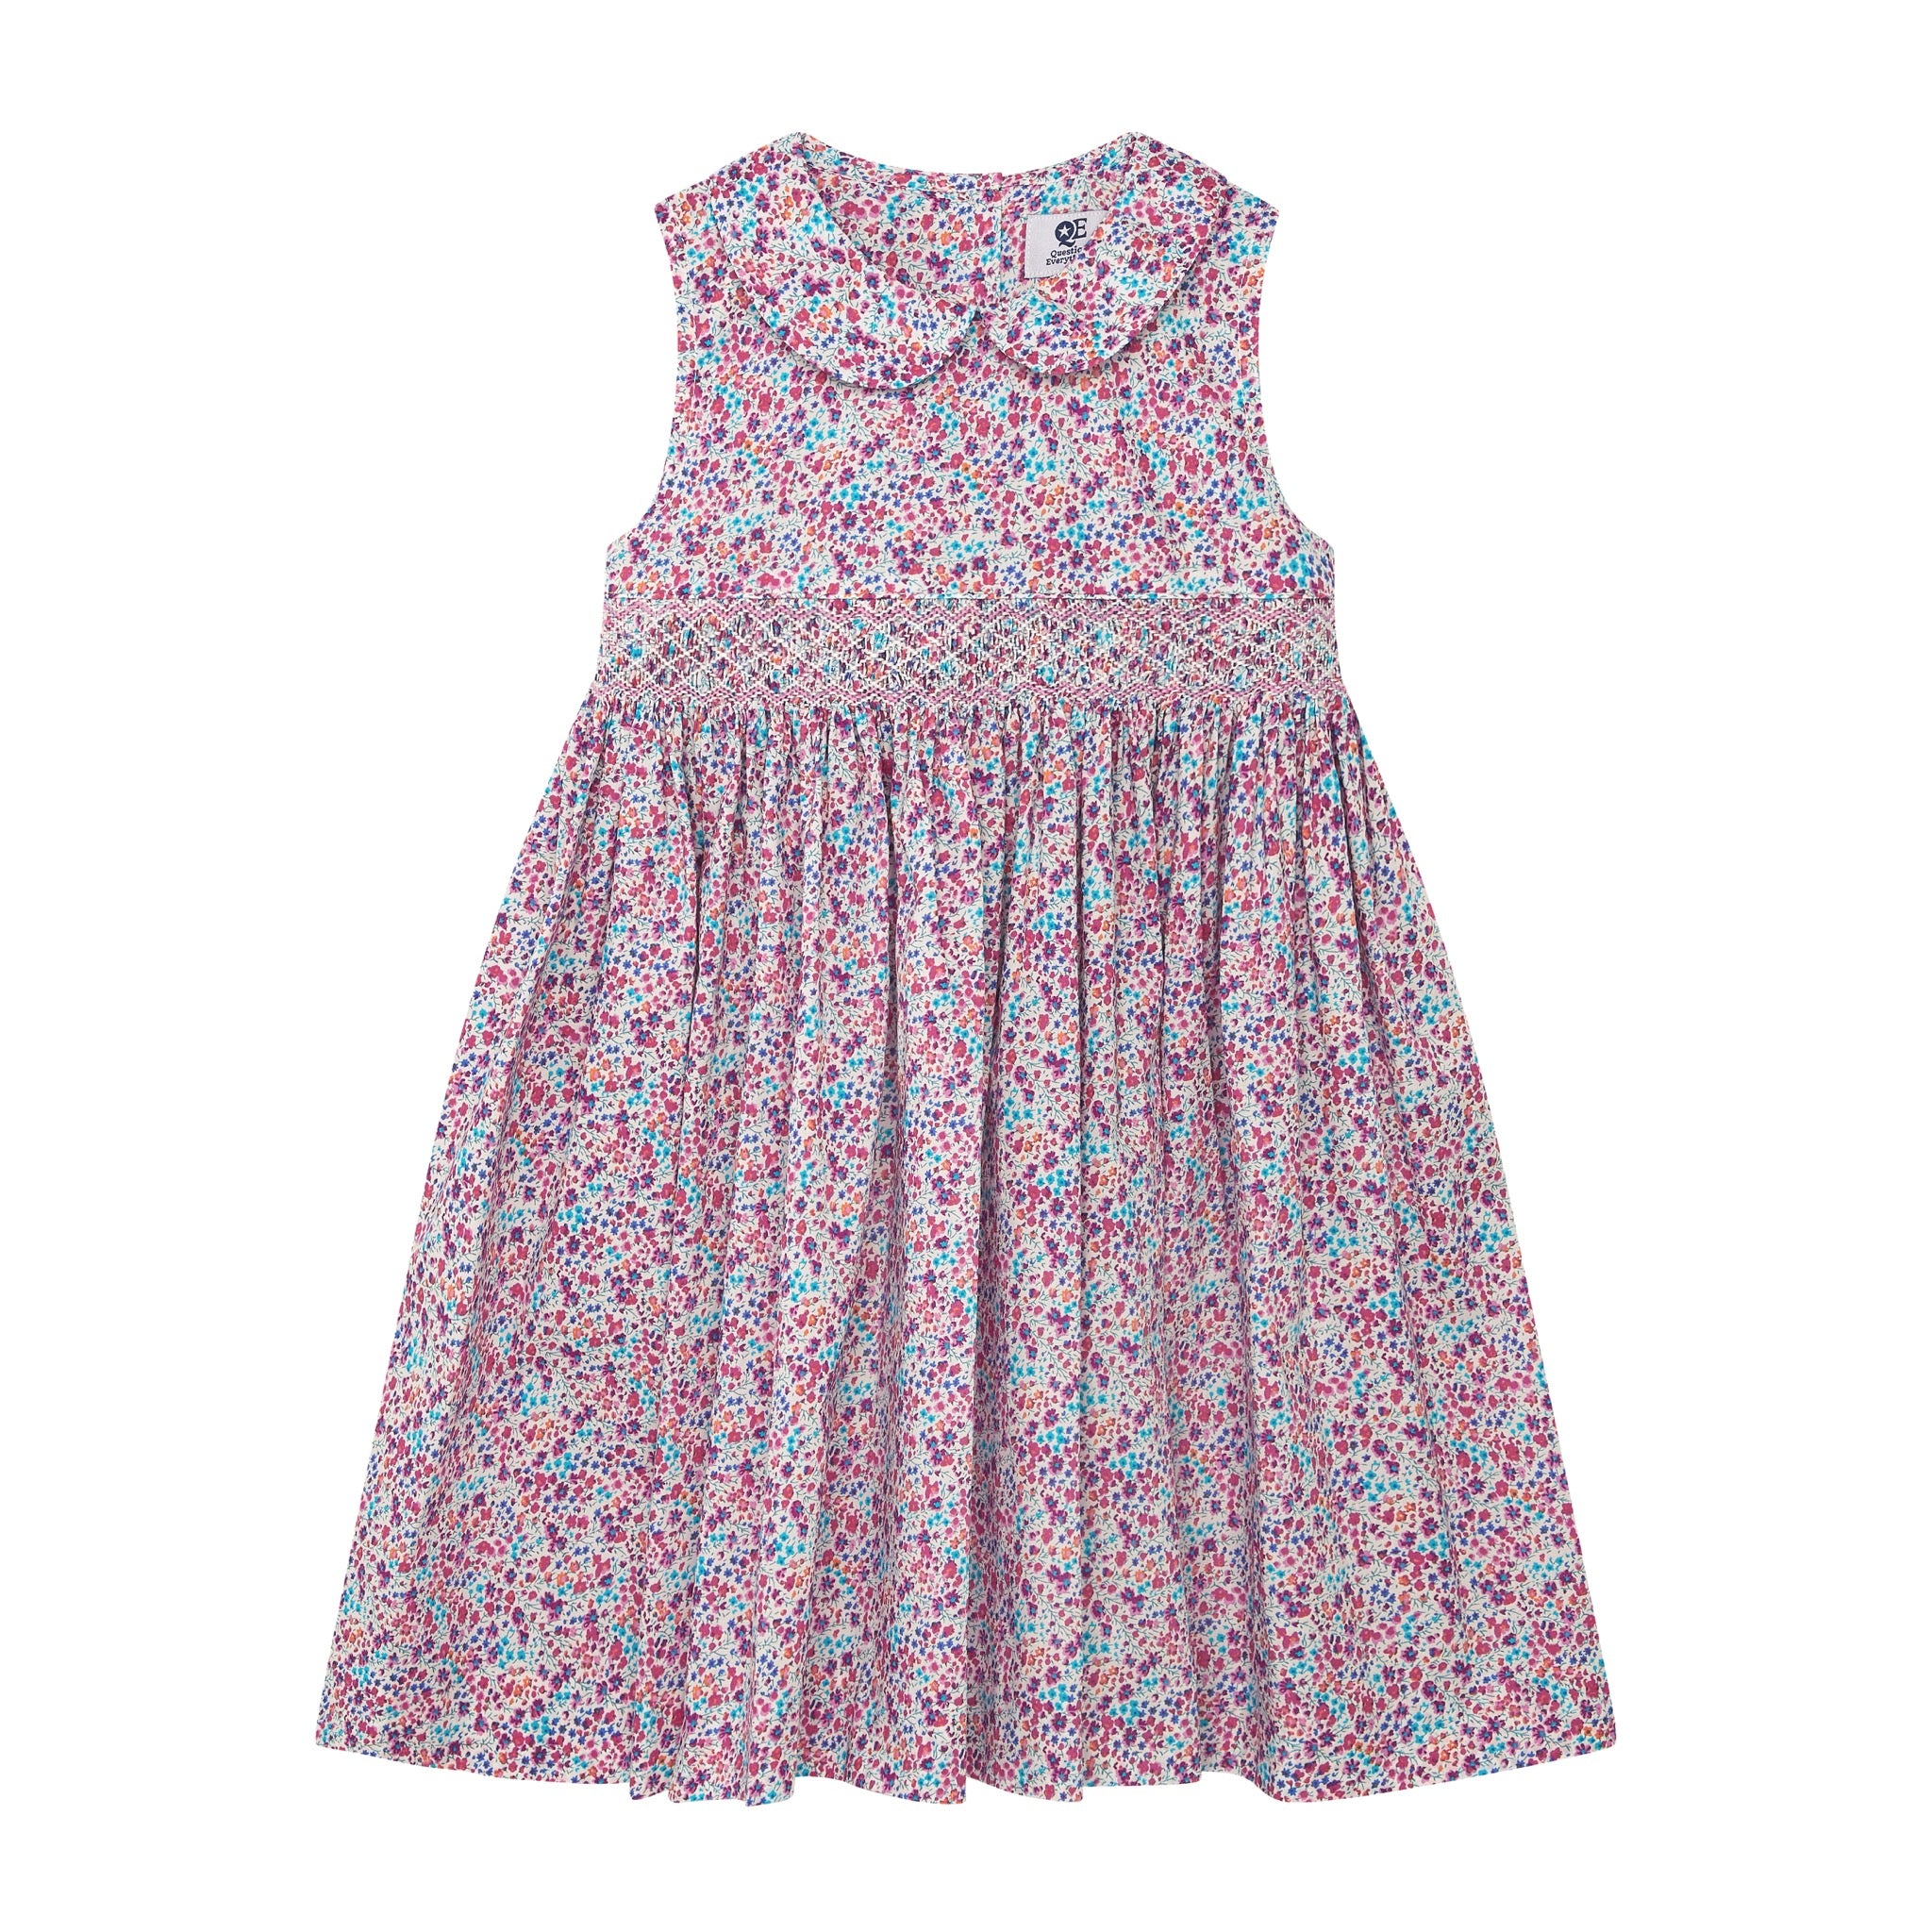 sleeveless ditzy floral dress made from cotton